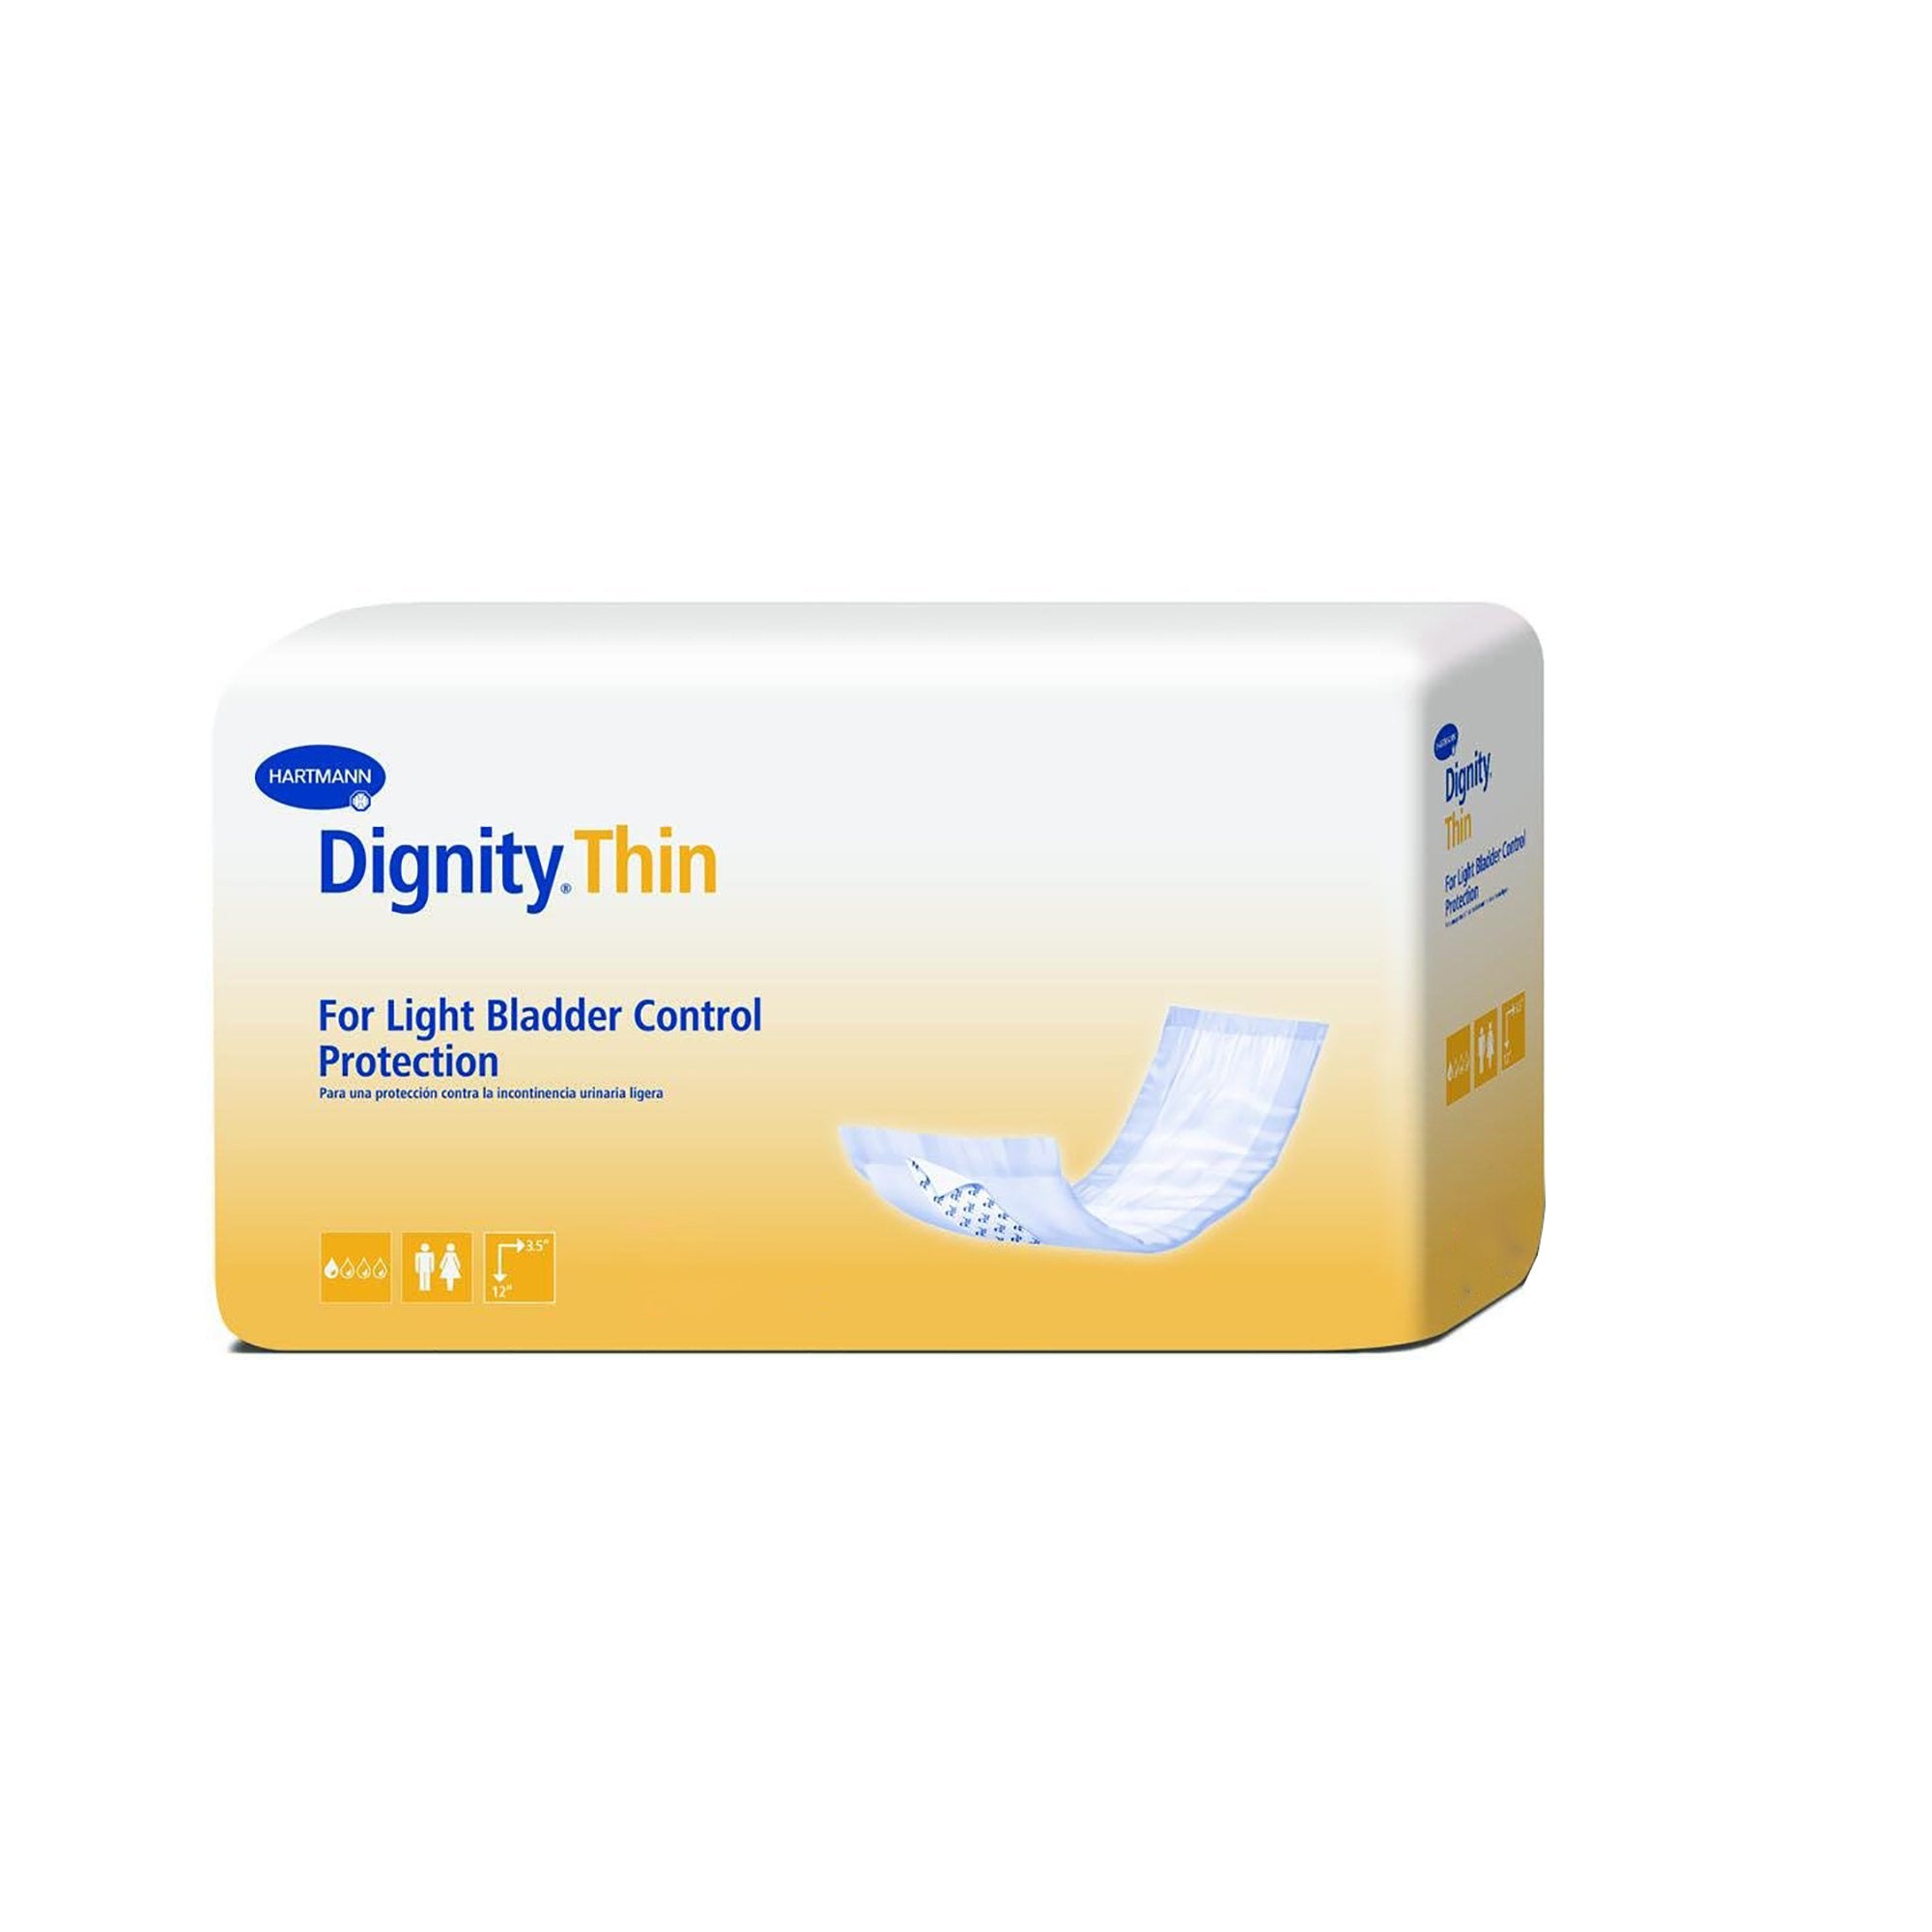 Bladder Control Pad Dignity® Thin 3-1/2 X 12 Inch Light Absorbency Polymer Core One Size Fits Most